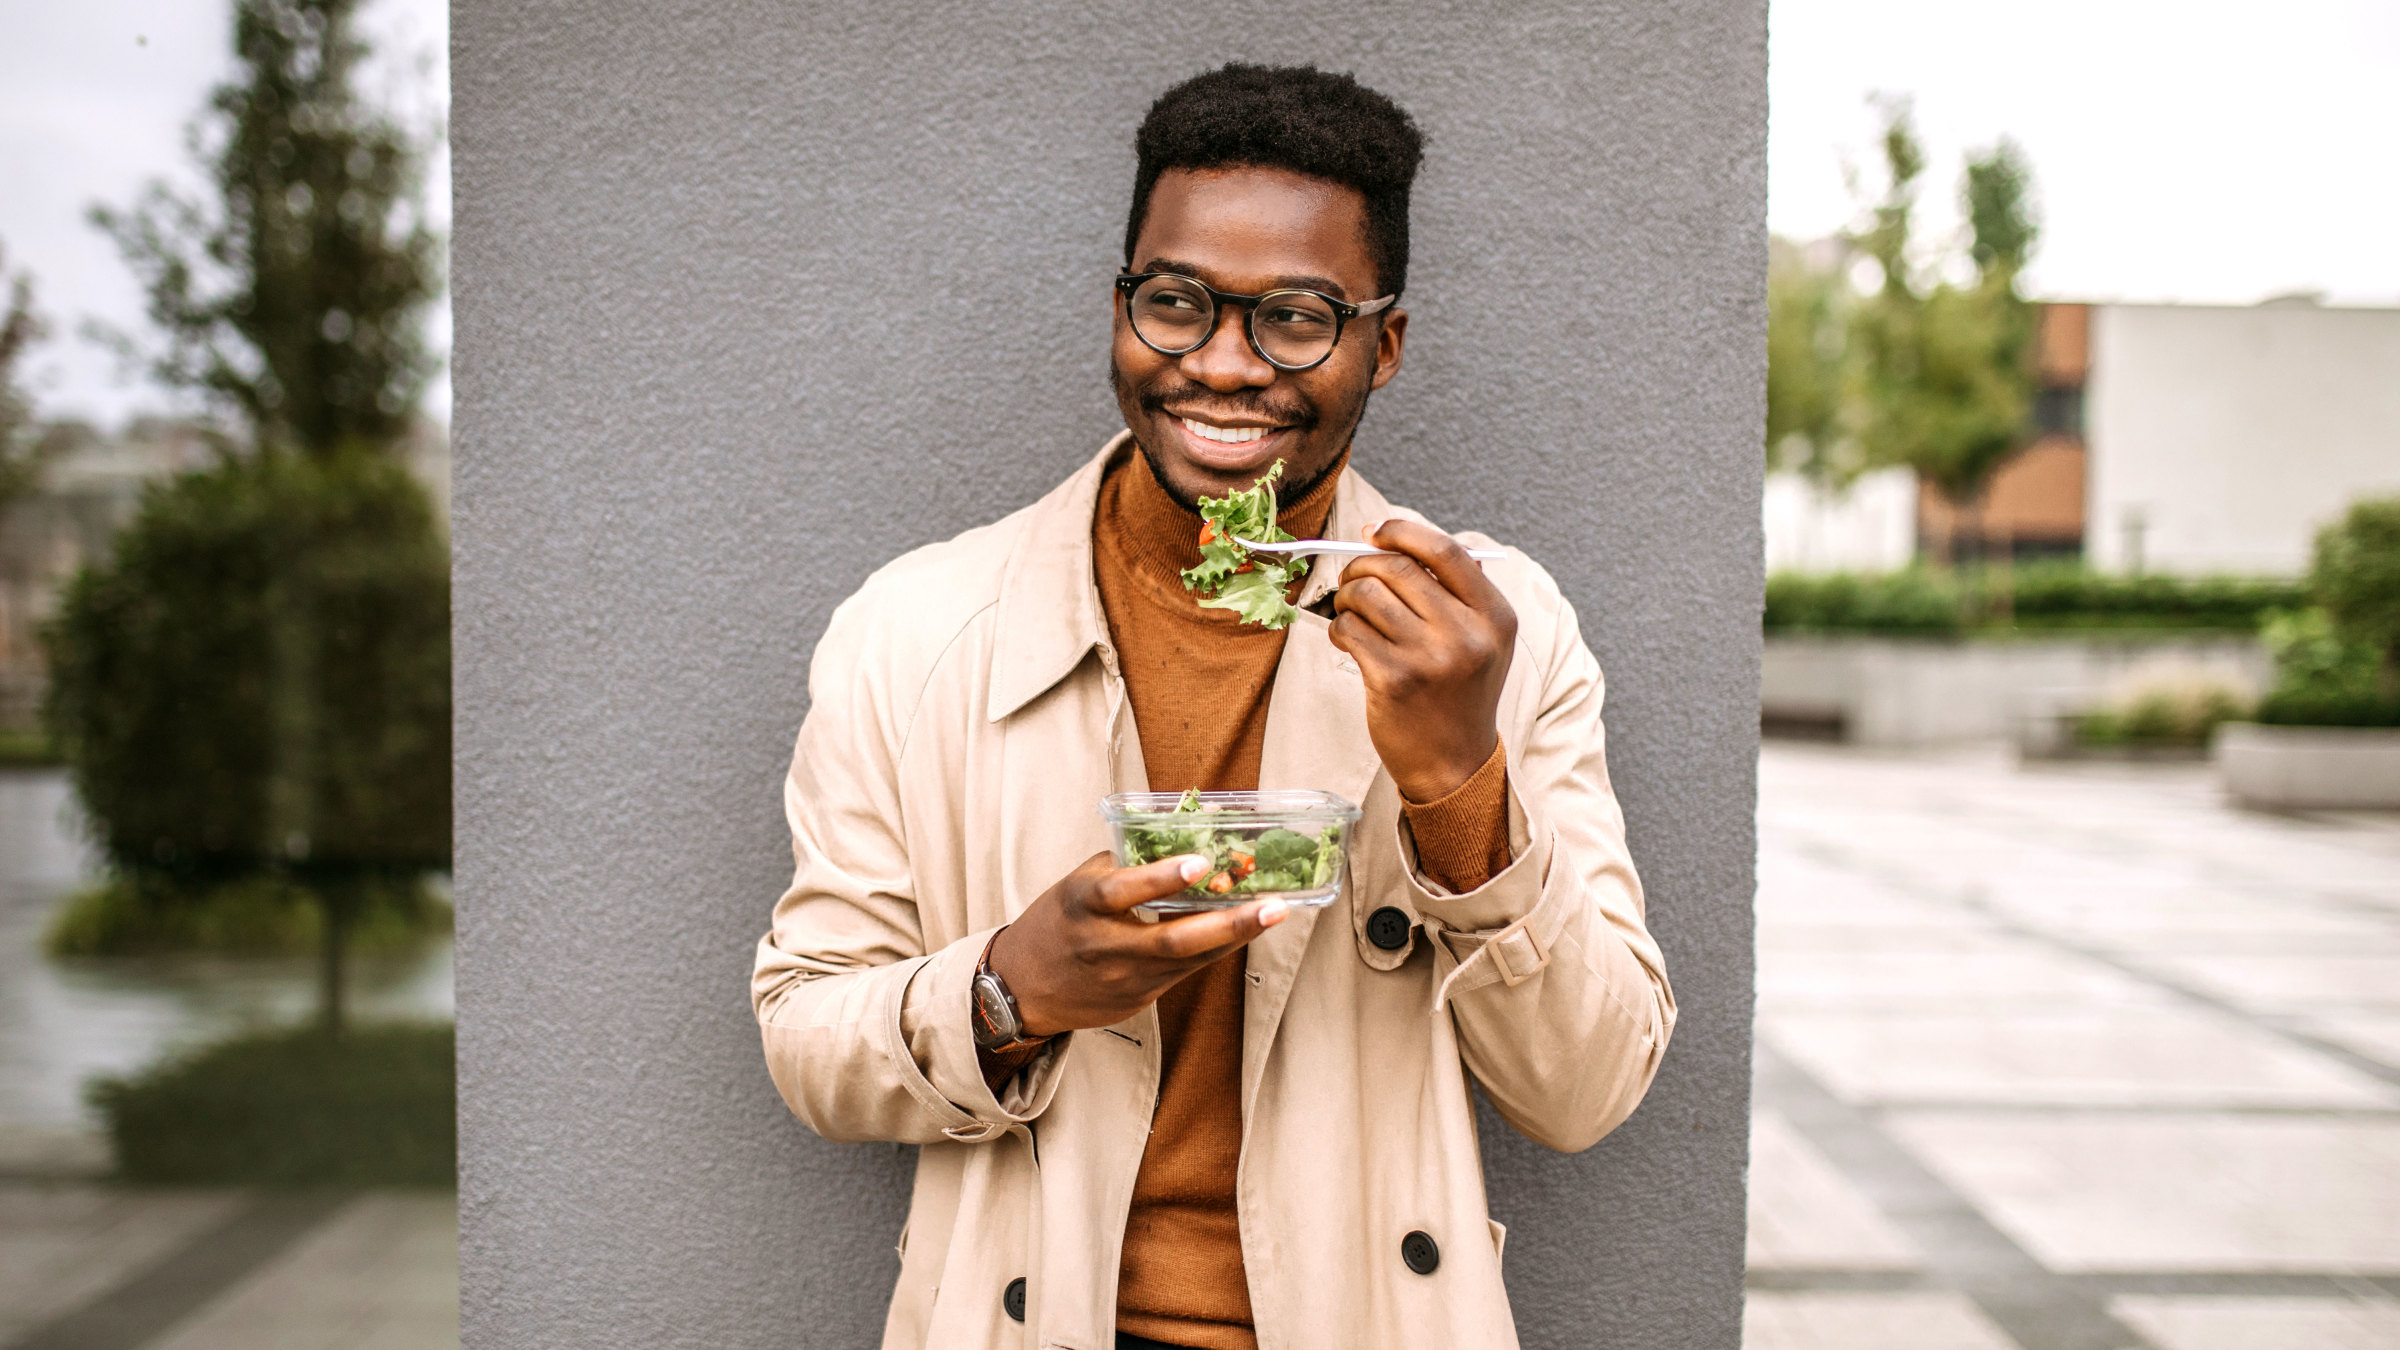 The men who stick to a strict style diet